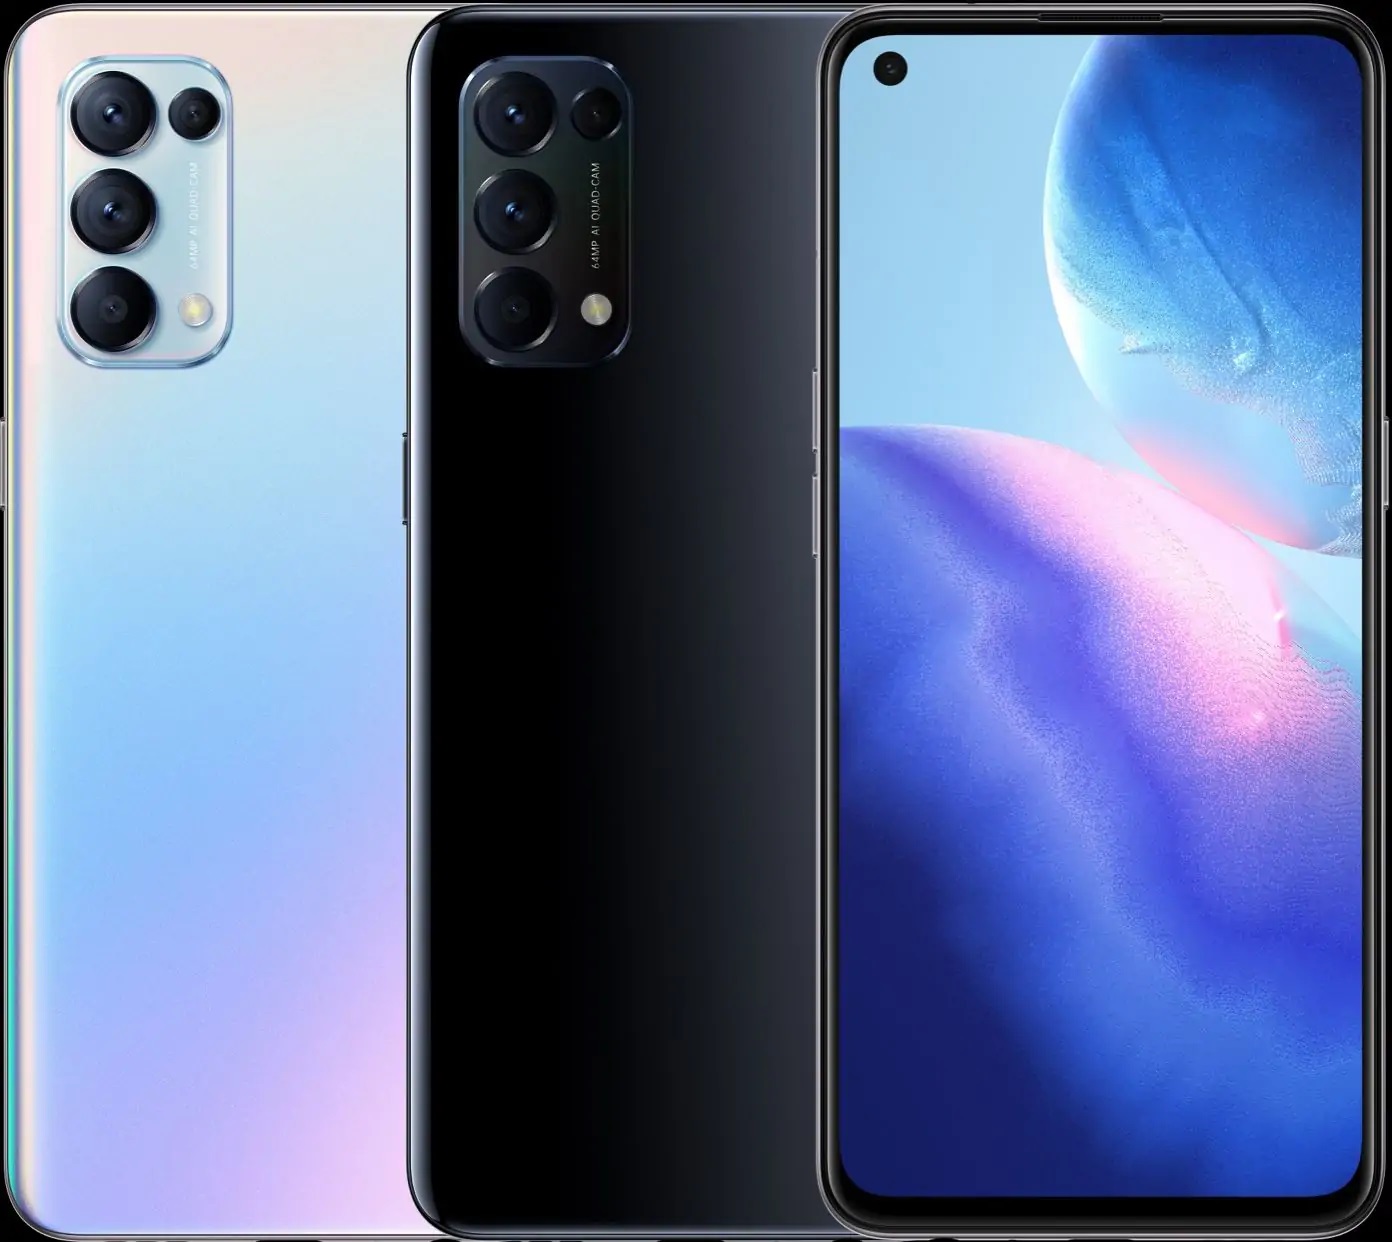 Oppo Reno 10, Oppo Reno 10 Pro and Oppo Reno 10 Pro+ debuts, price starts  at ₹39,999: Check details inside